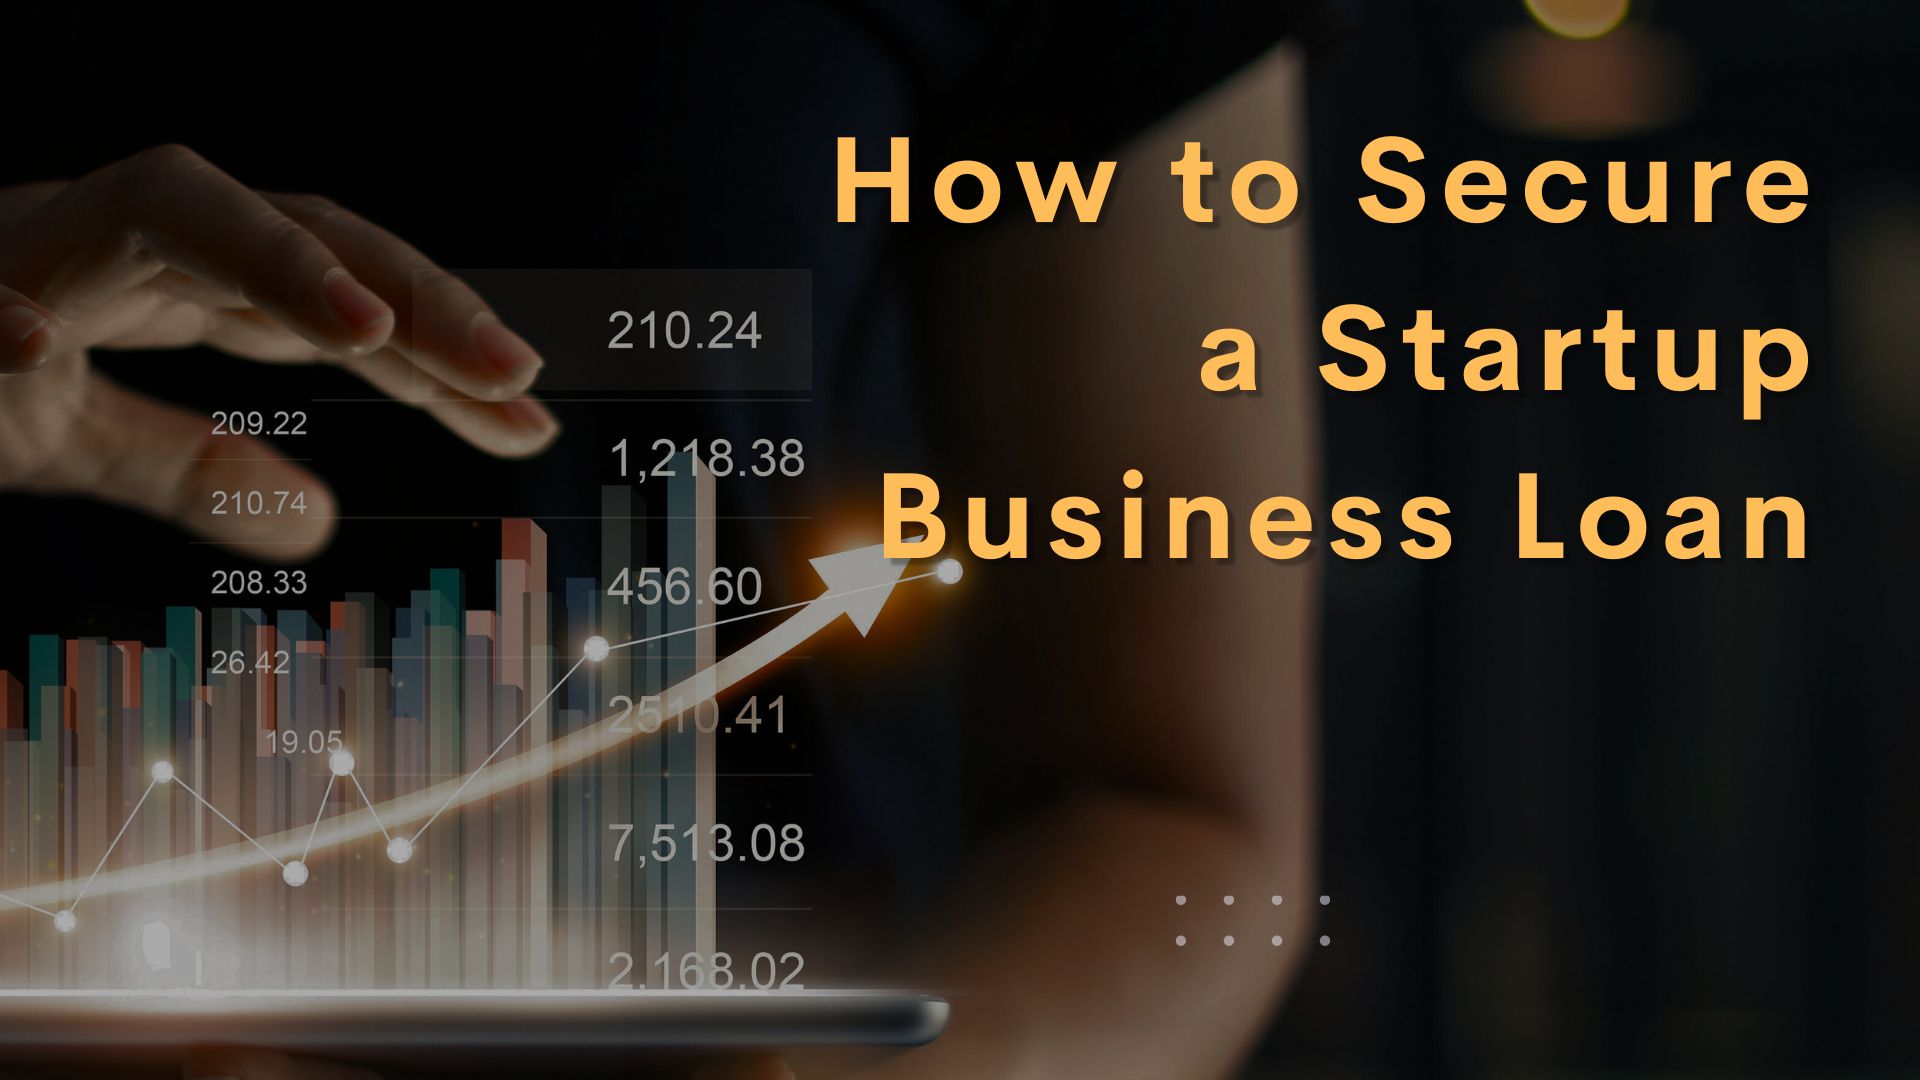 How to Secure a Startup Business Loan